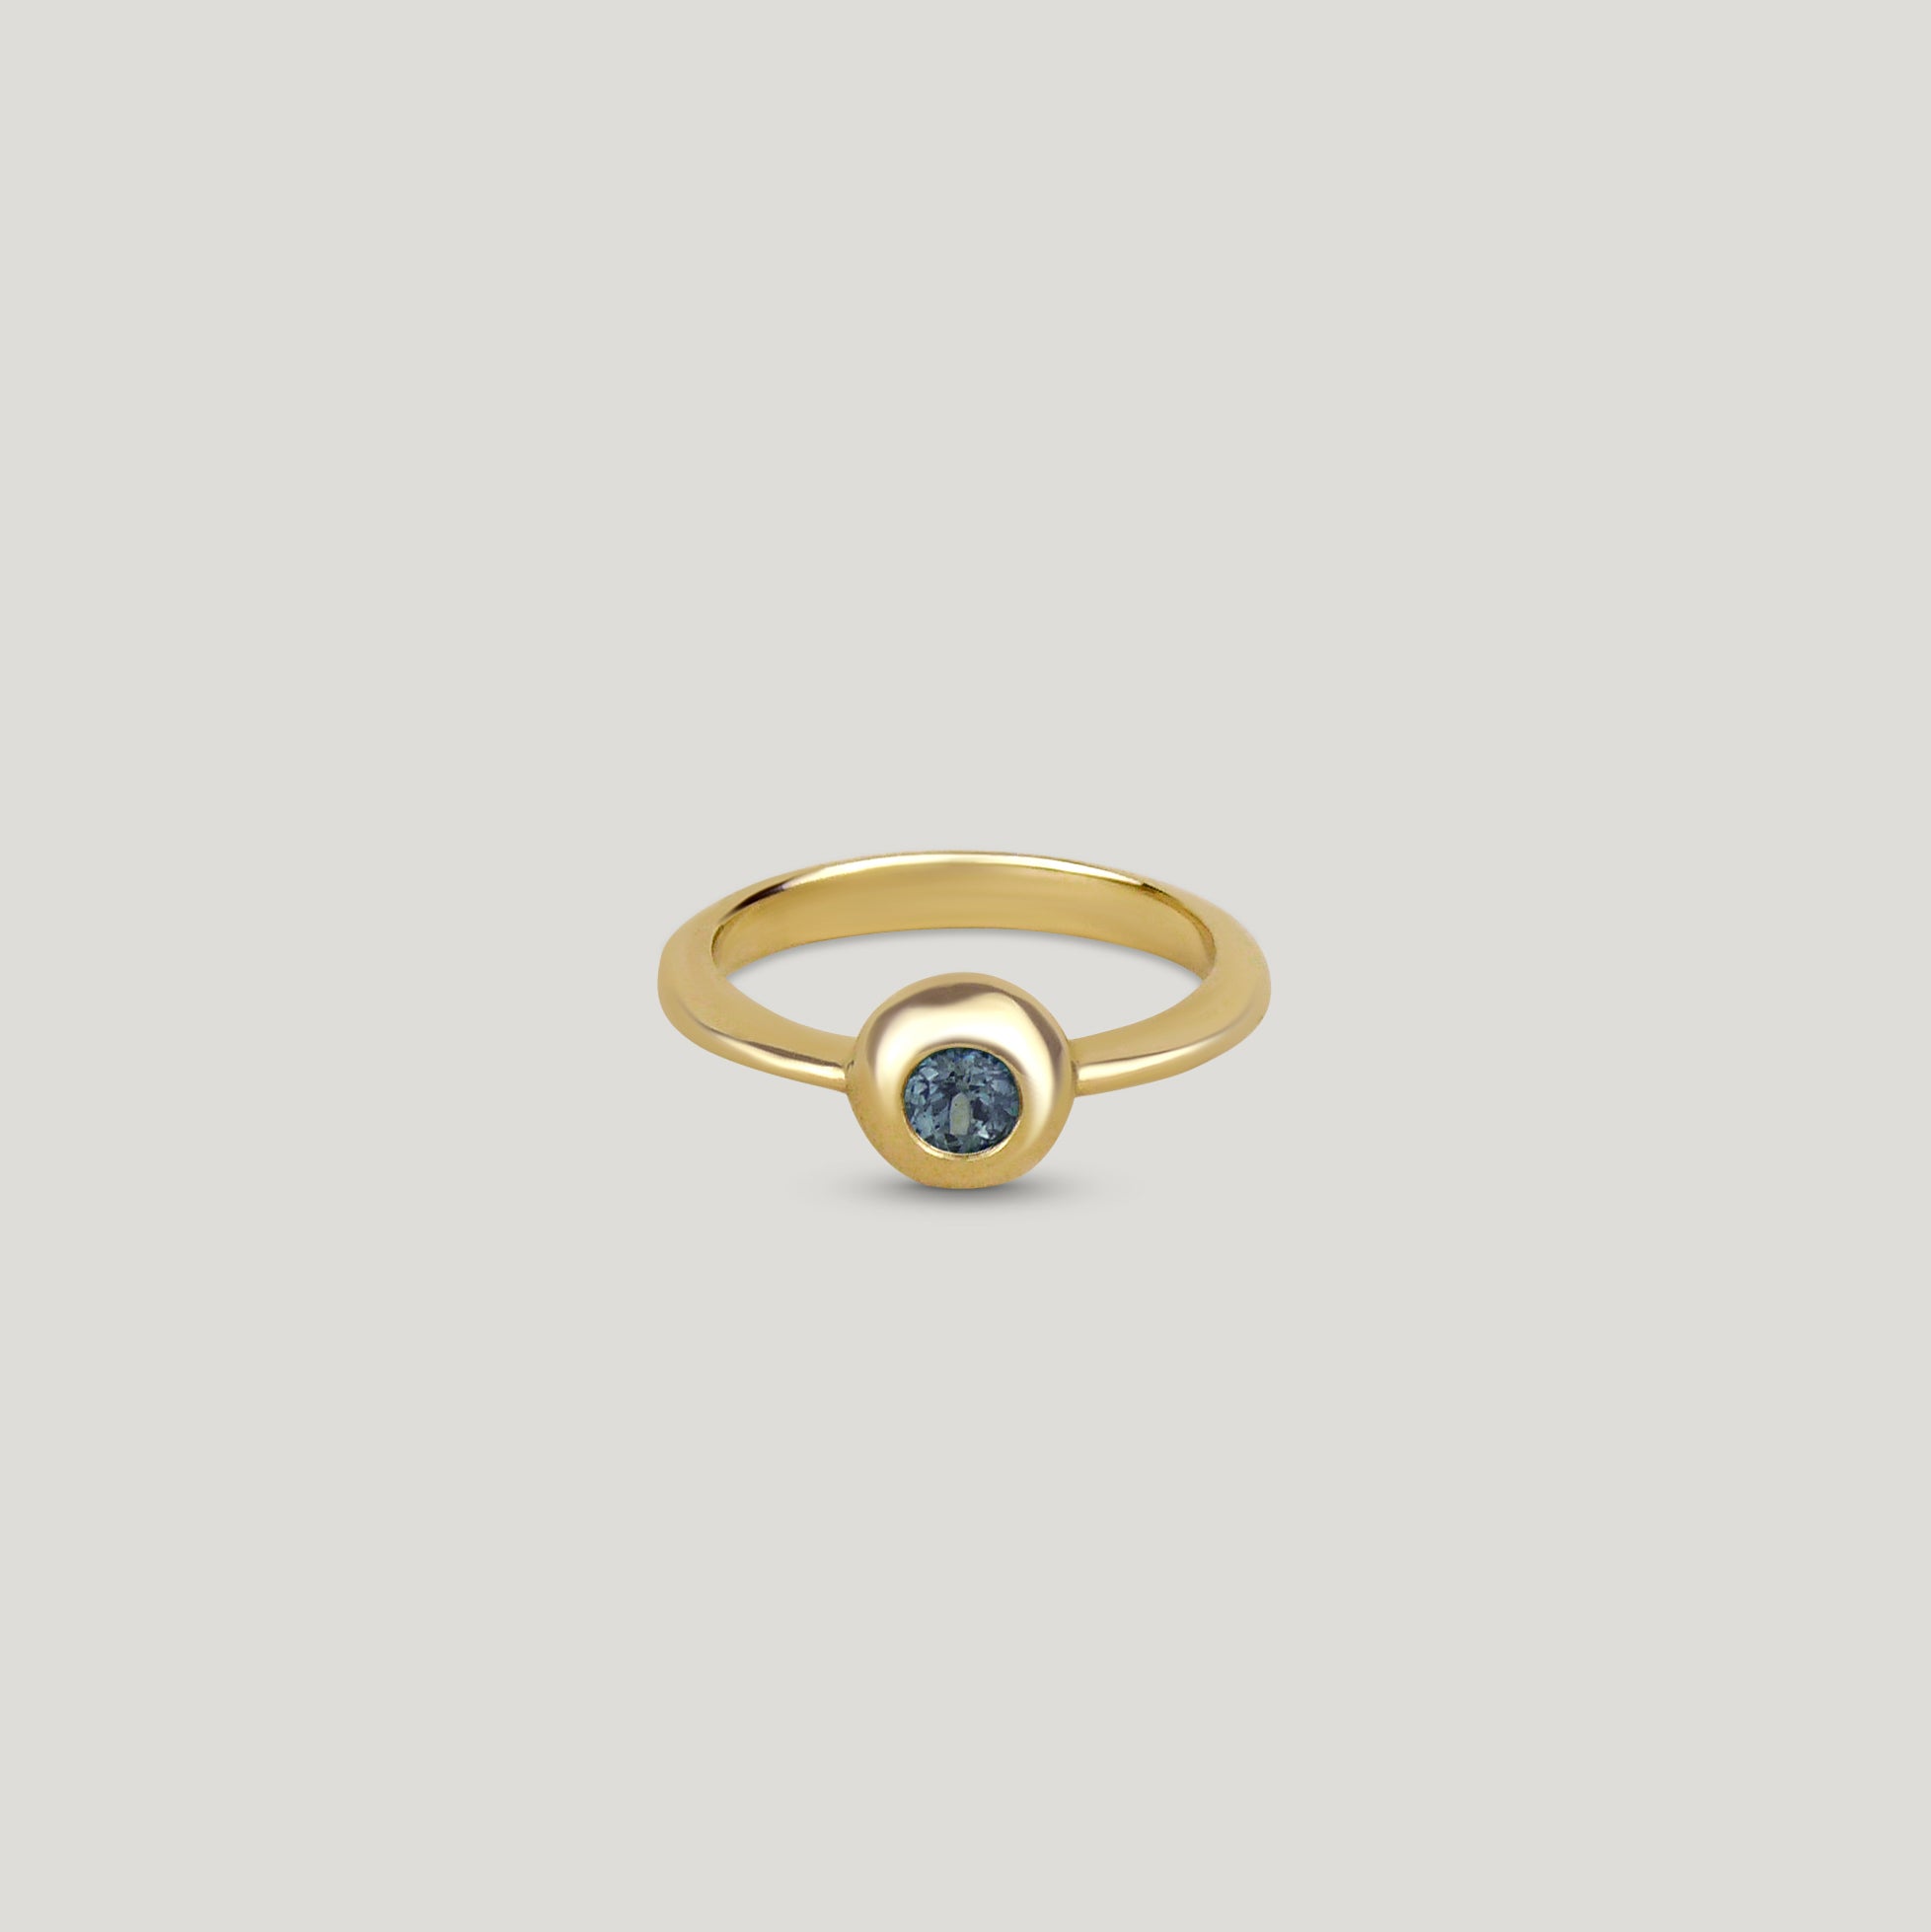 Yellow gold teal sapphire foundation solitaire ring on a neutral background